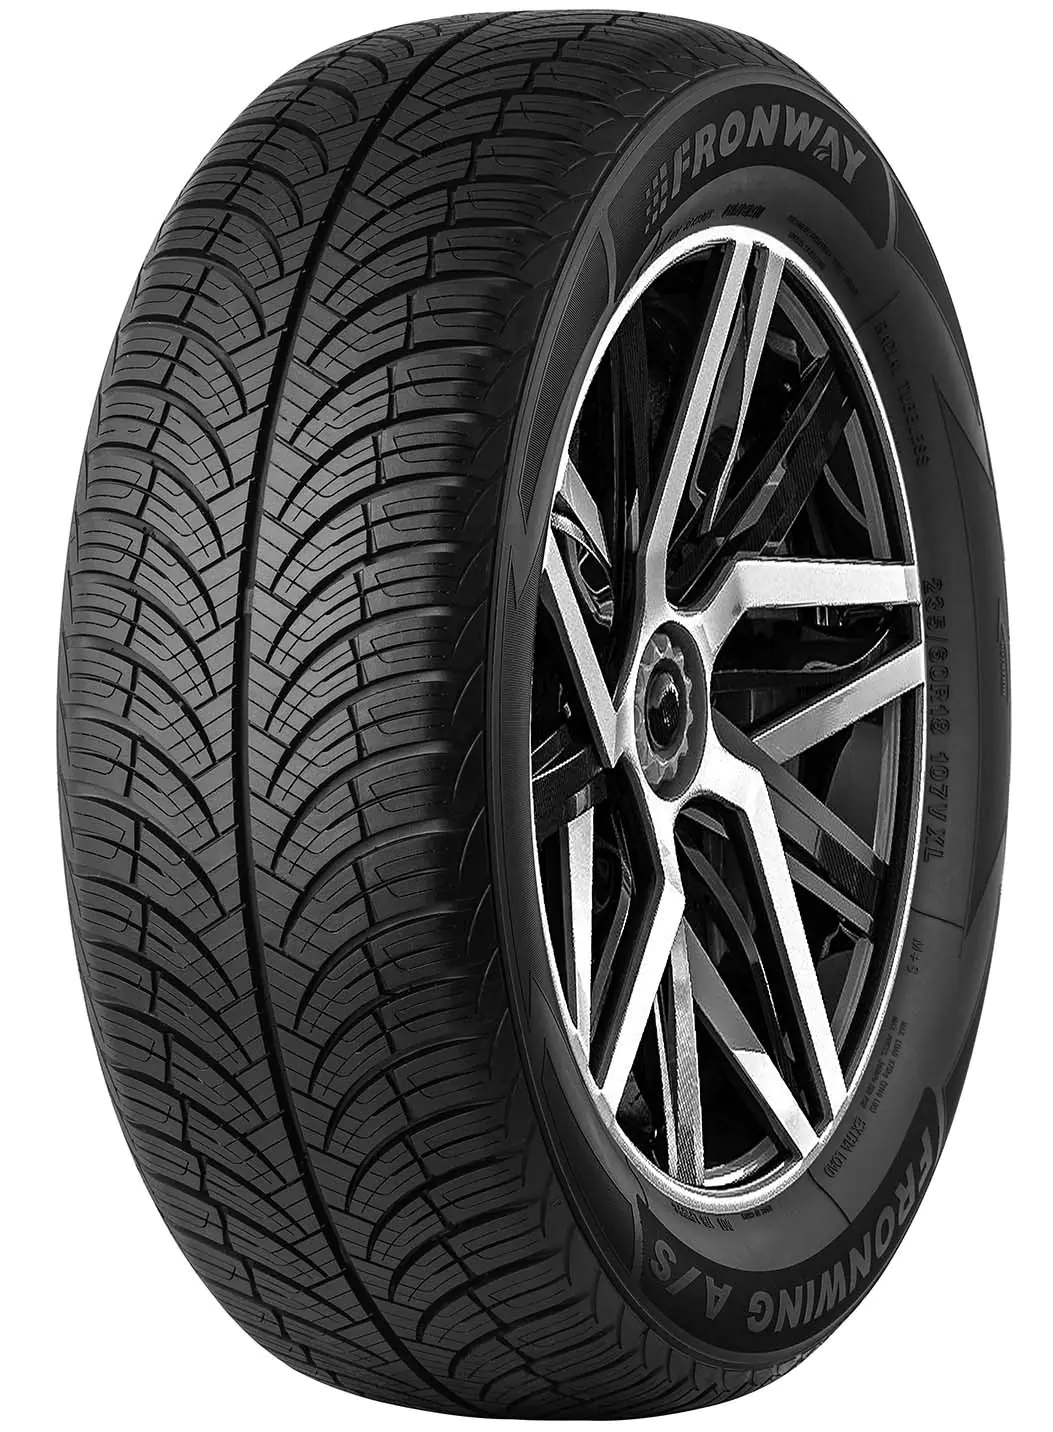 Fronway Fronway 225/55 R18 98V FRONWING A/S pneumatici nuovi All Season 